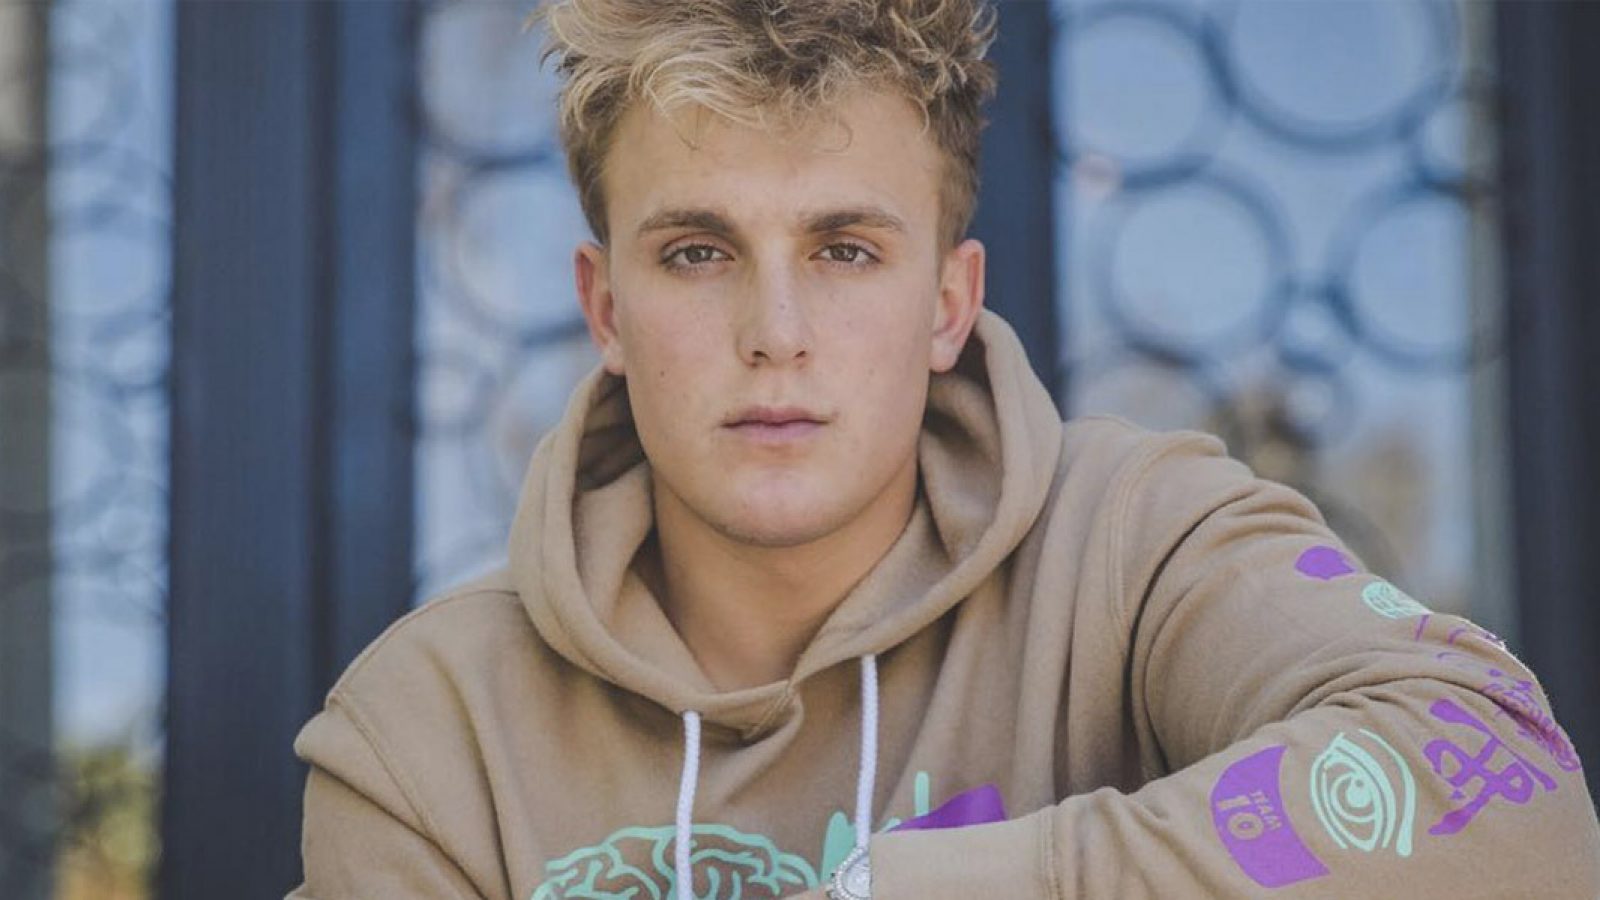 Jake Pauls advice on how to be successful might surprise you